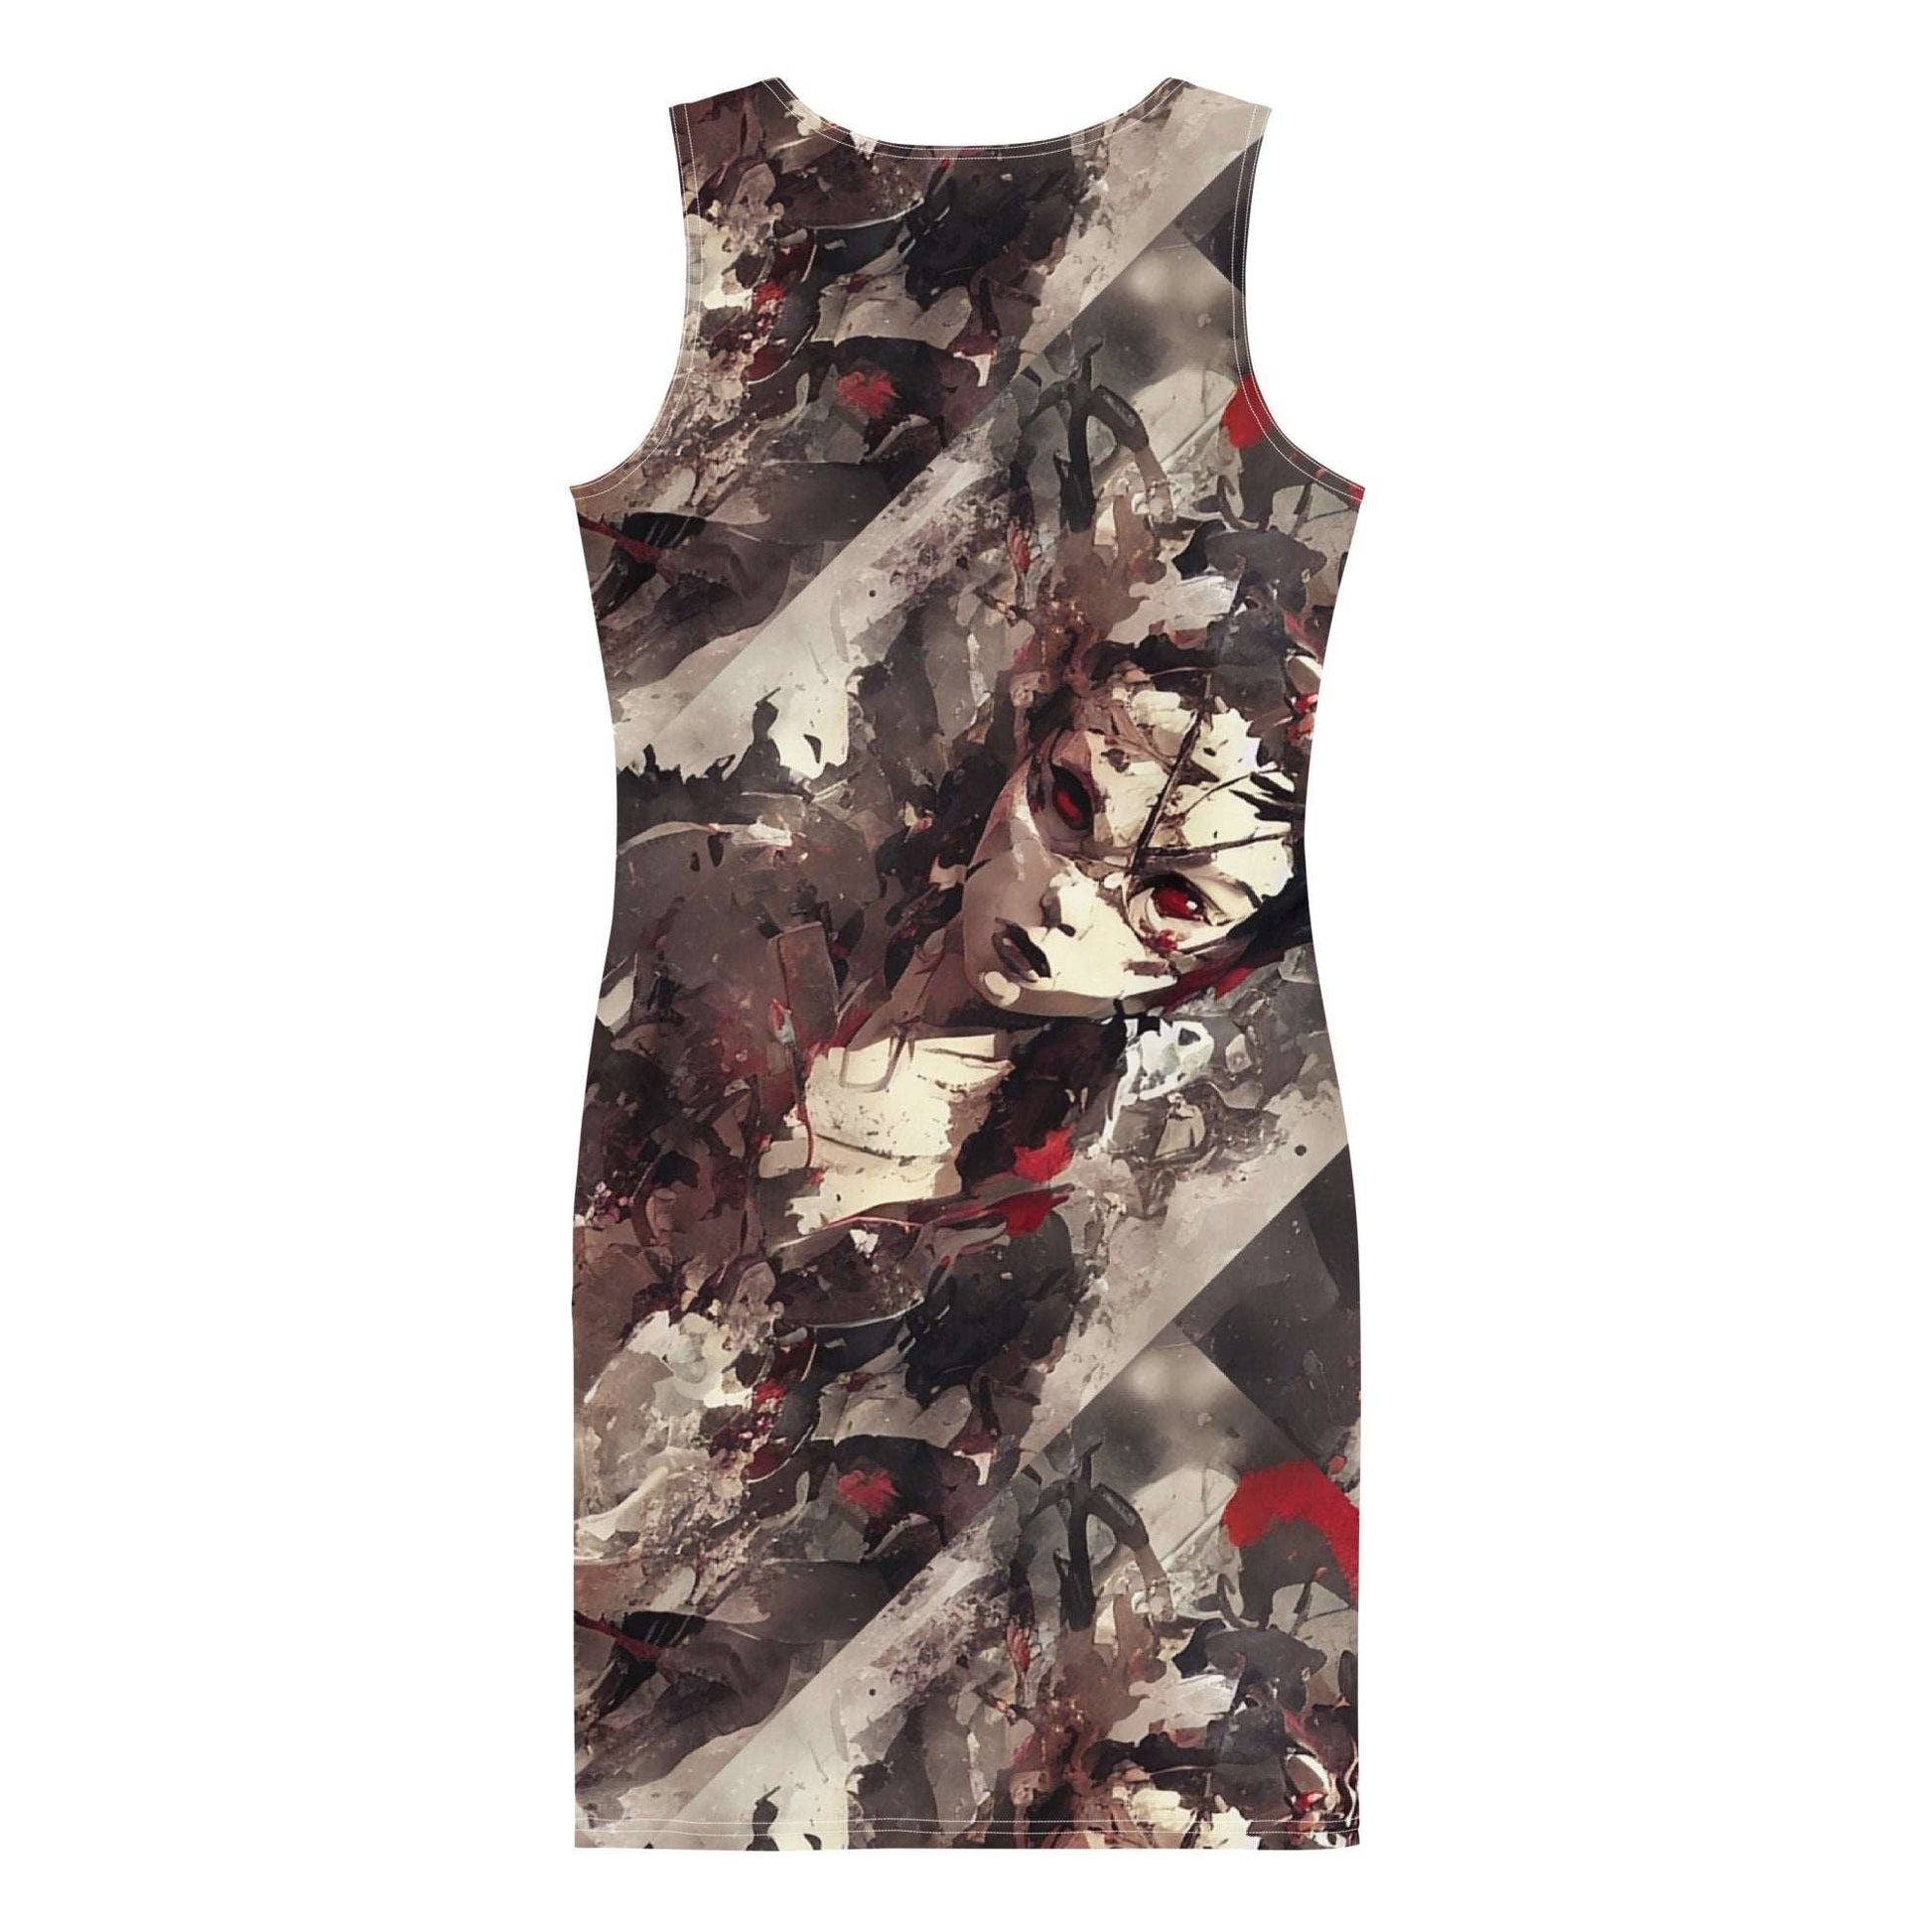 Zhora Bodycon Dress - Souled Out World